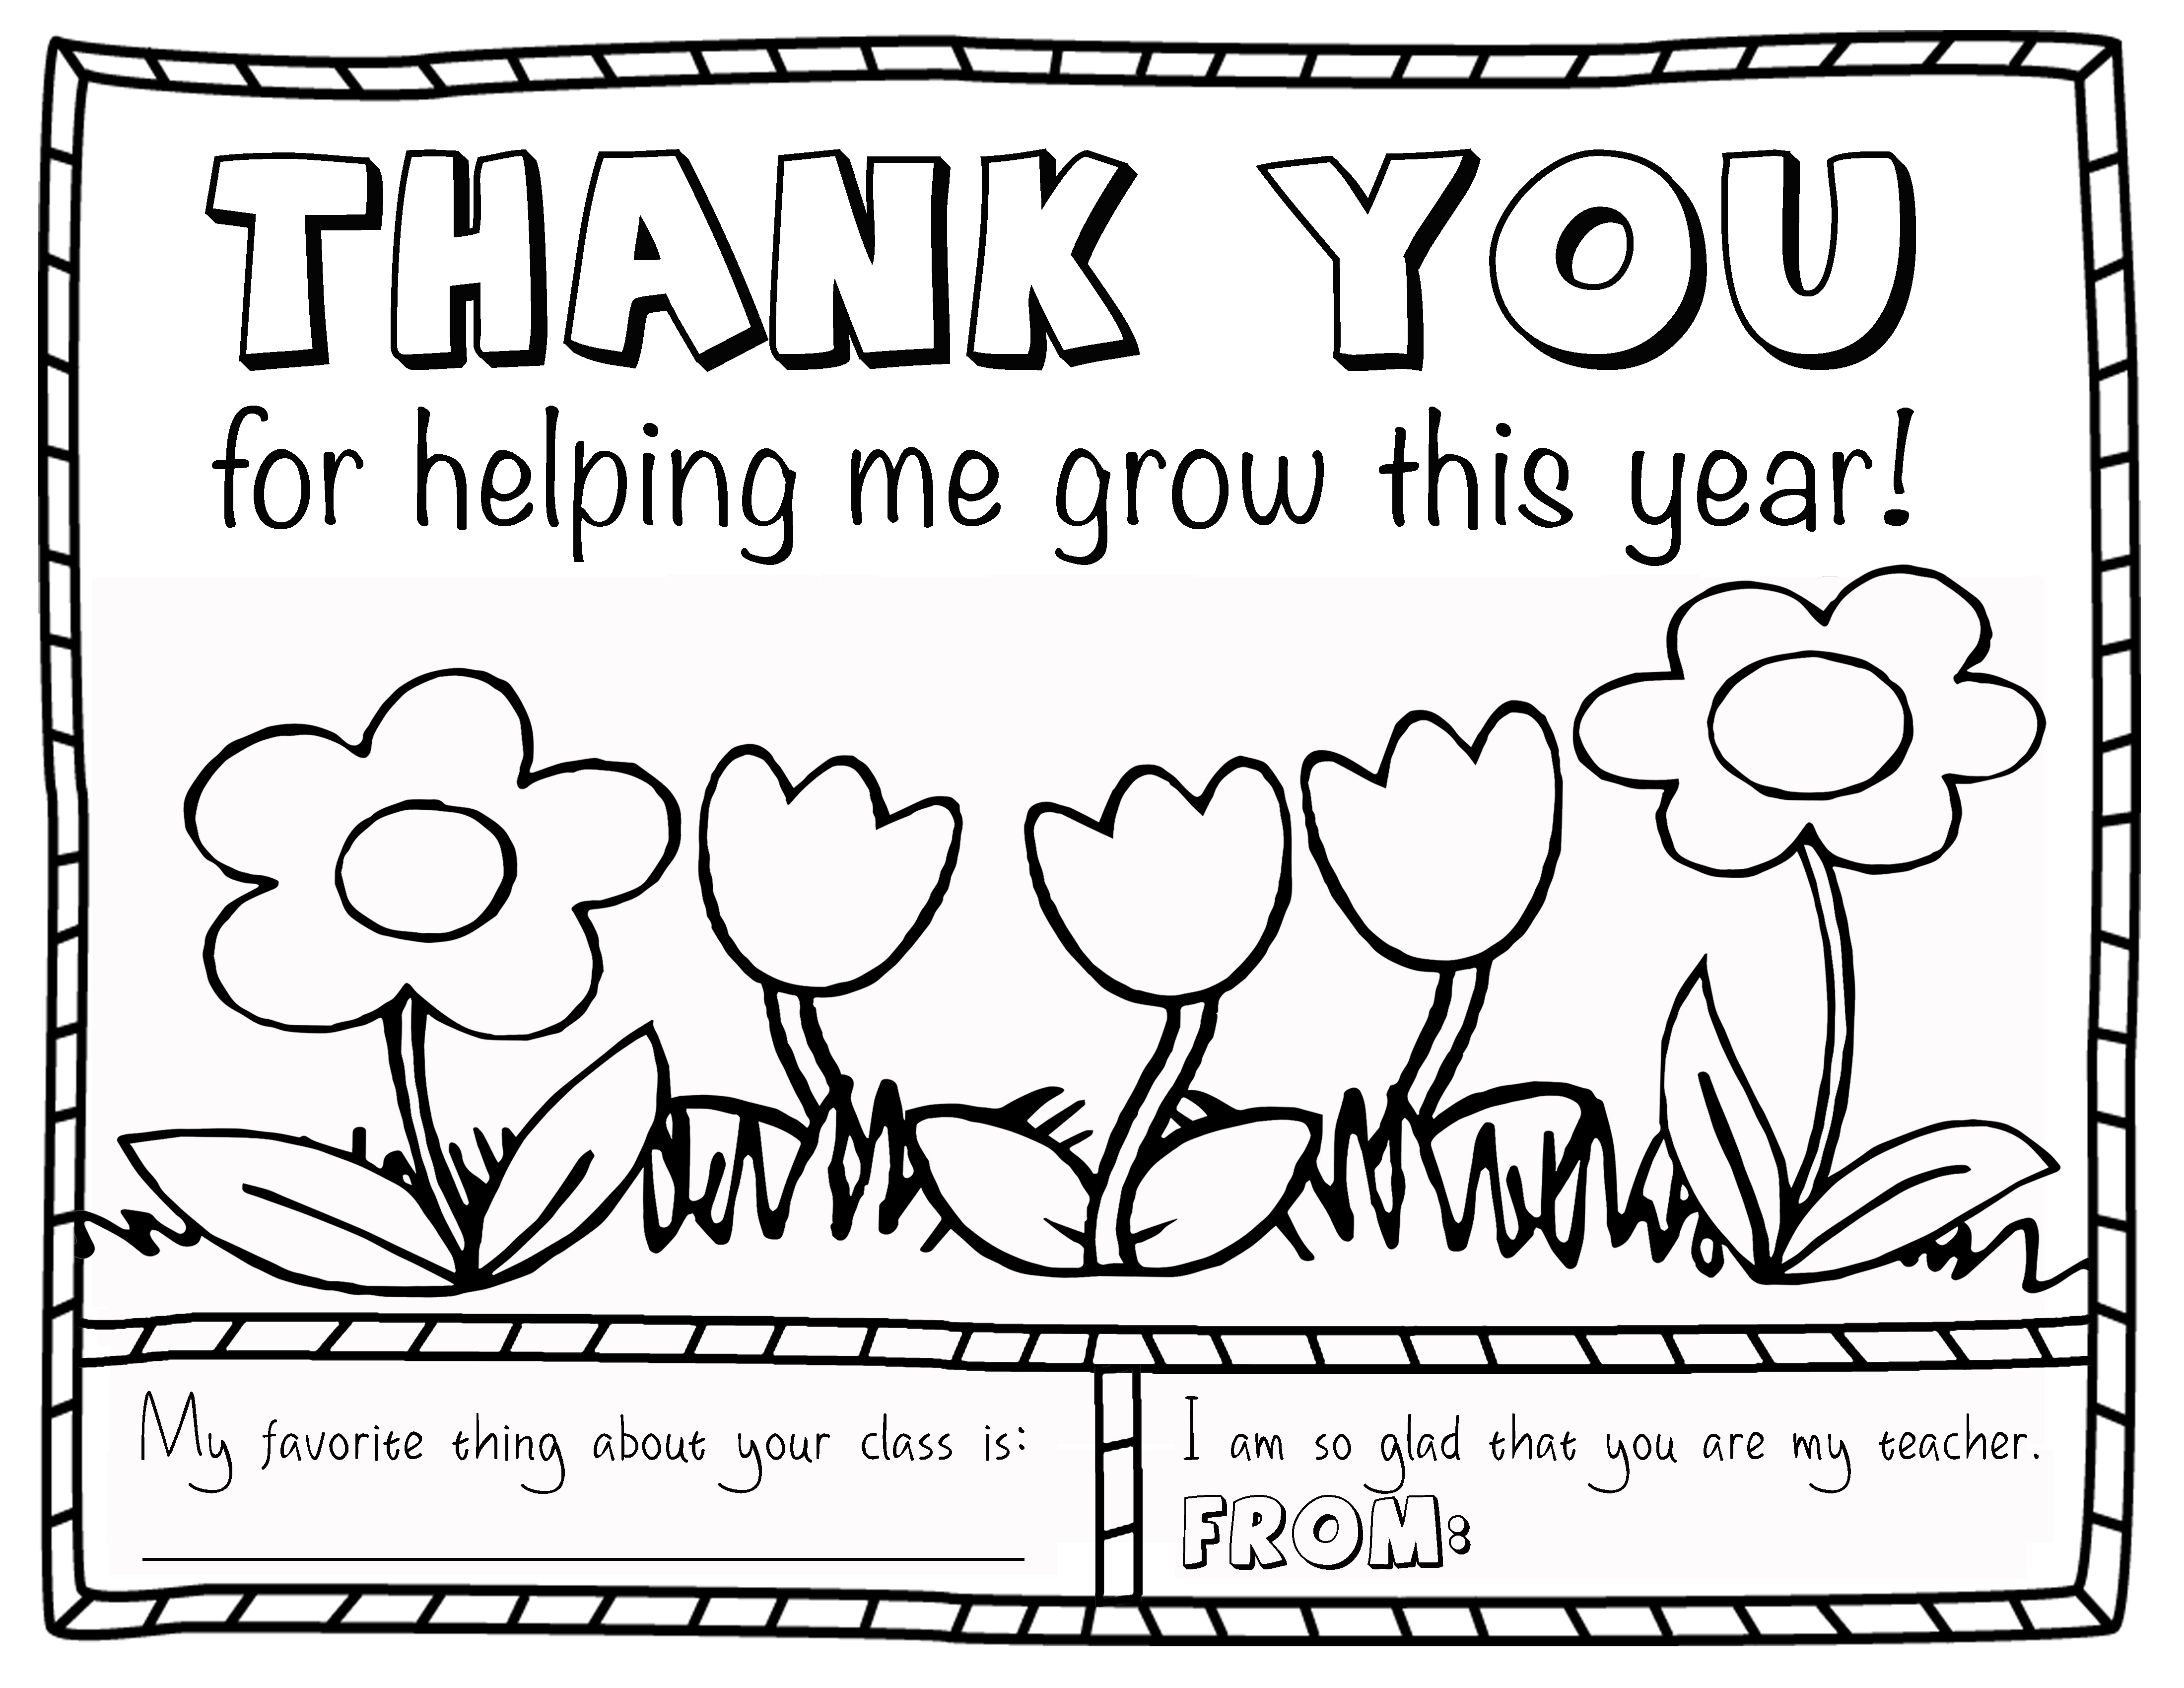 colouring-thank-you-cards-for-teachers